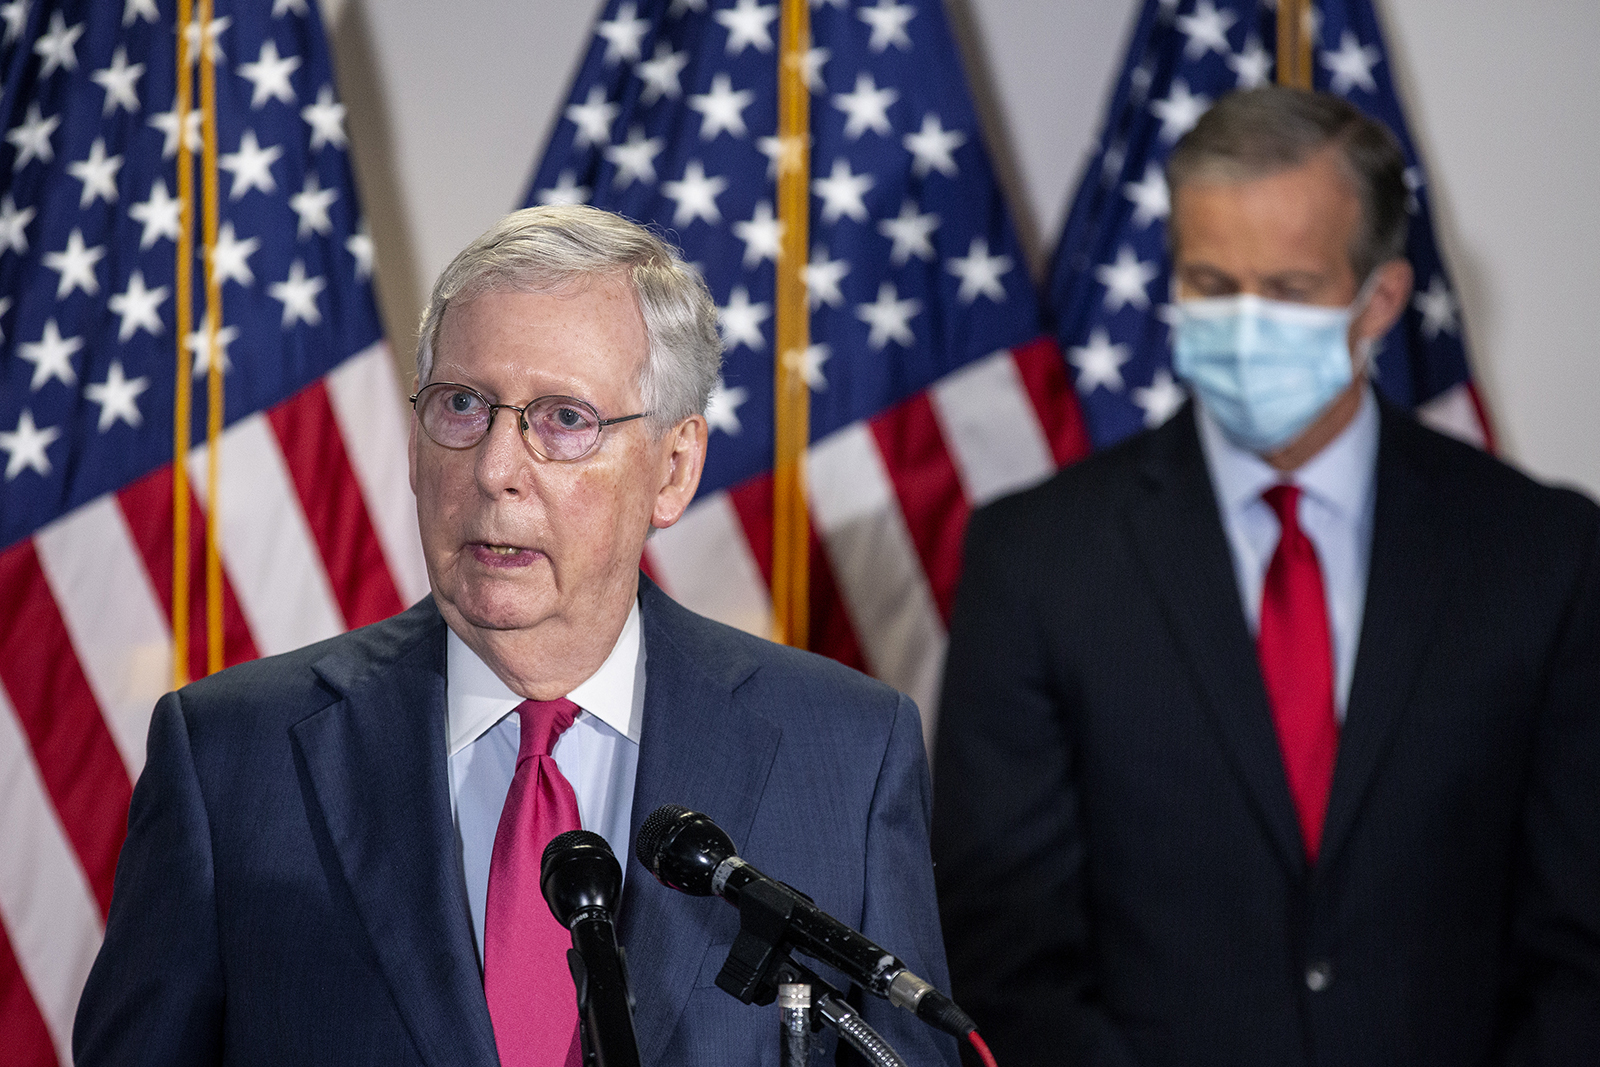 Senate Majority Leader Mitch McConnell, speaks during a news conference in Washington, D.C., U.S., on Tuesday, May 19.